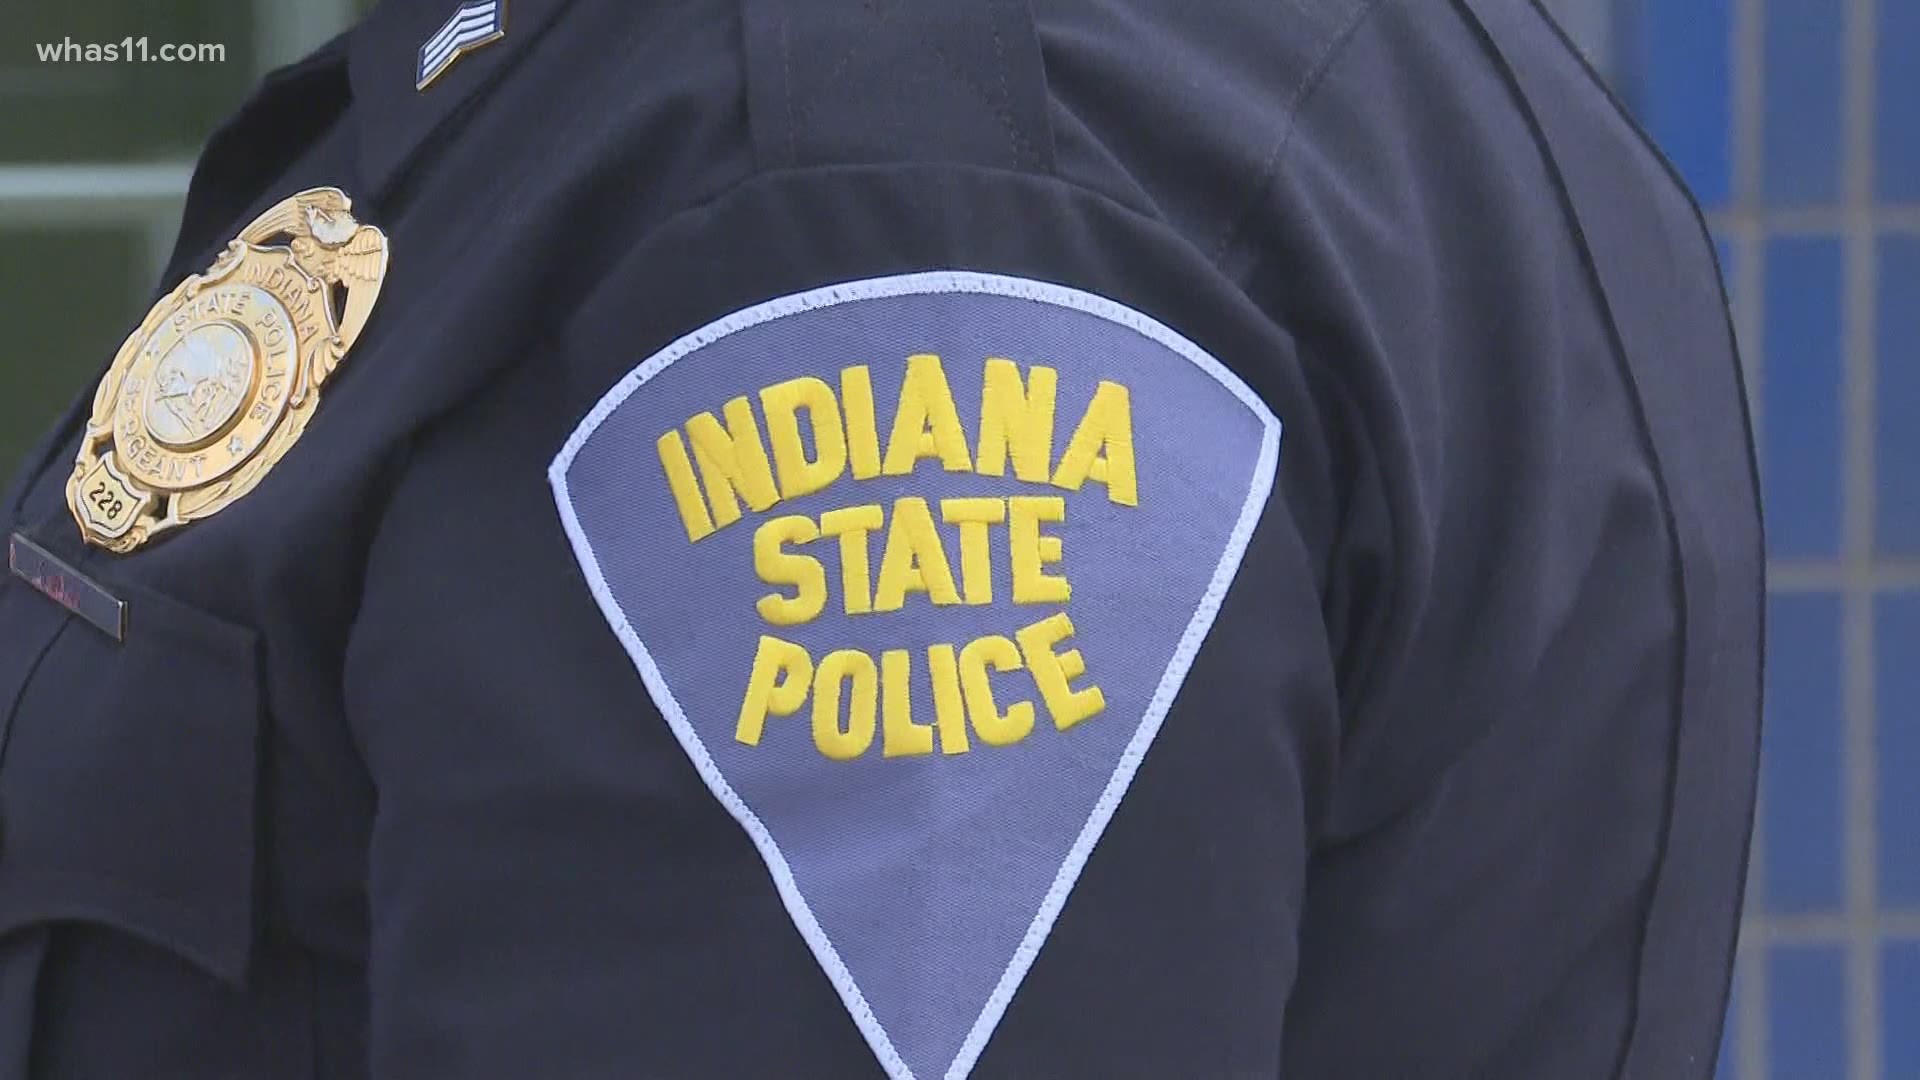 An Indiana State Police (ISP) spokesperson says deputies were serving felony arrest warrants when the shooting happened Friday.